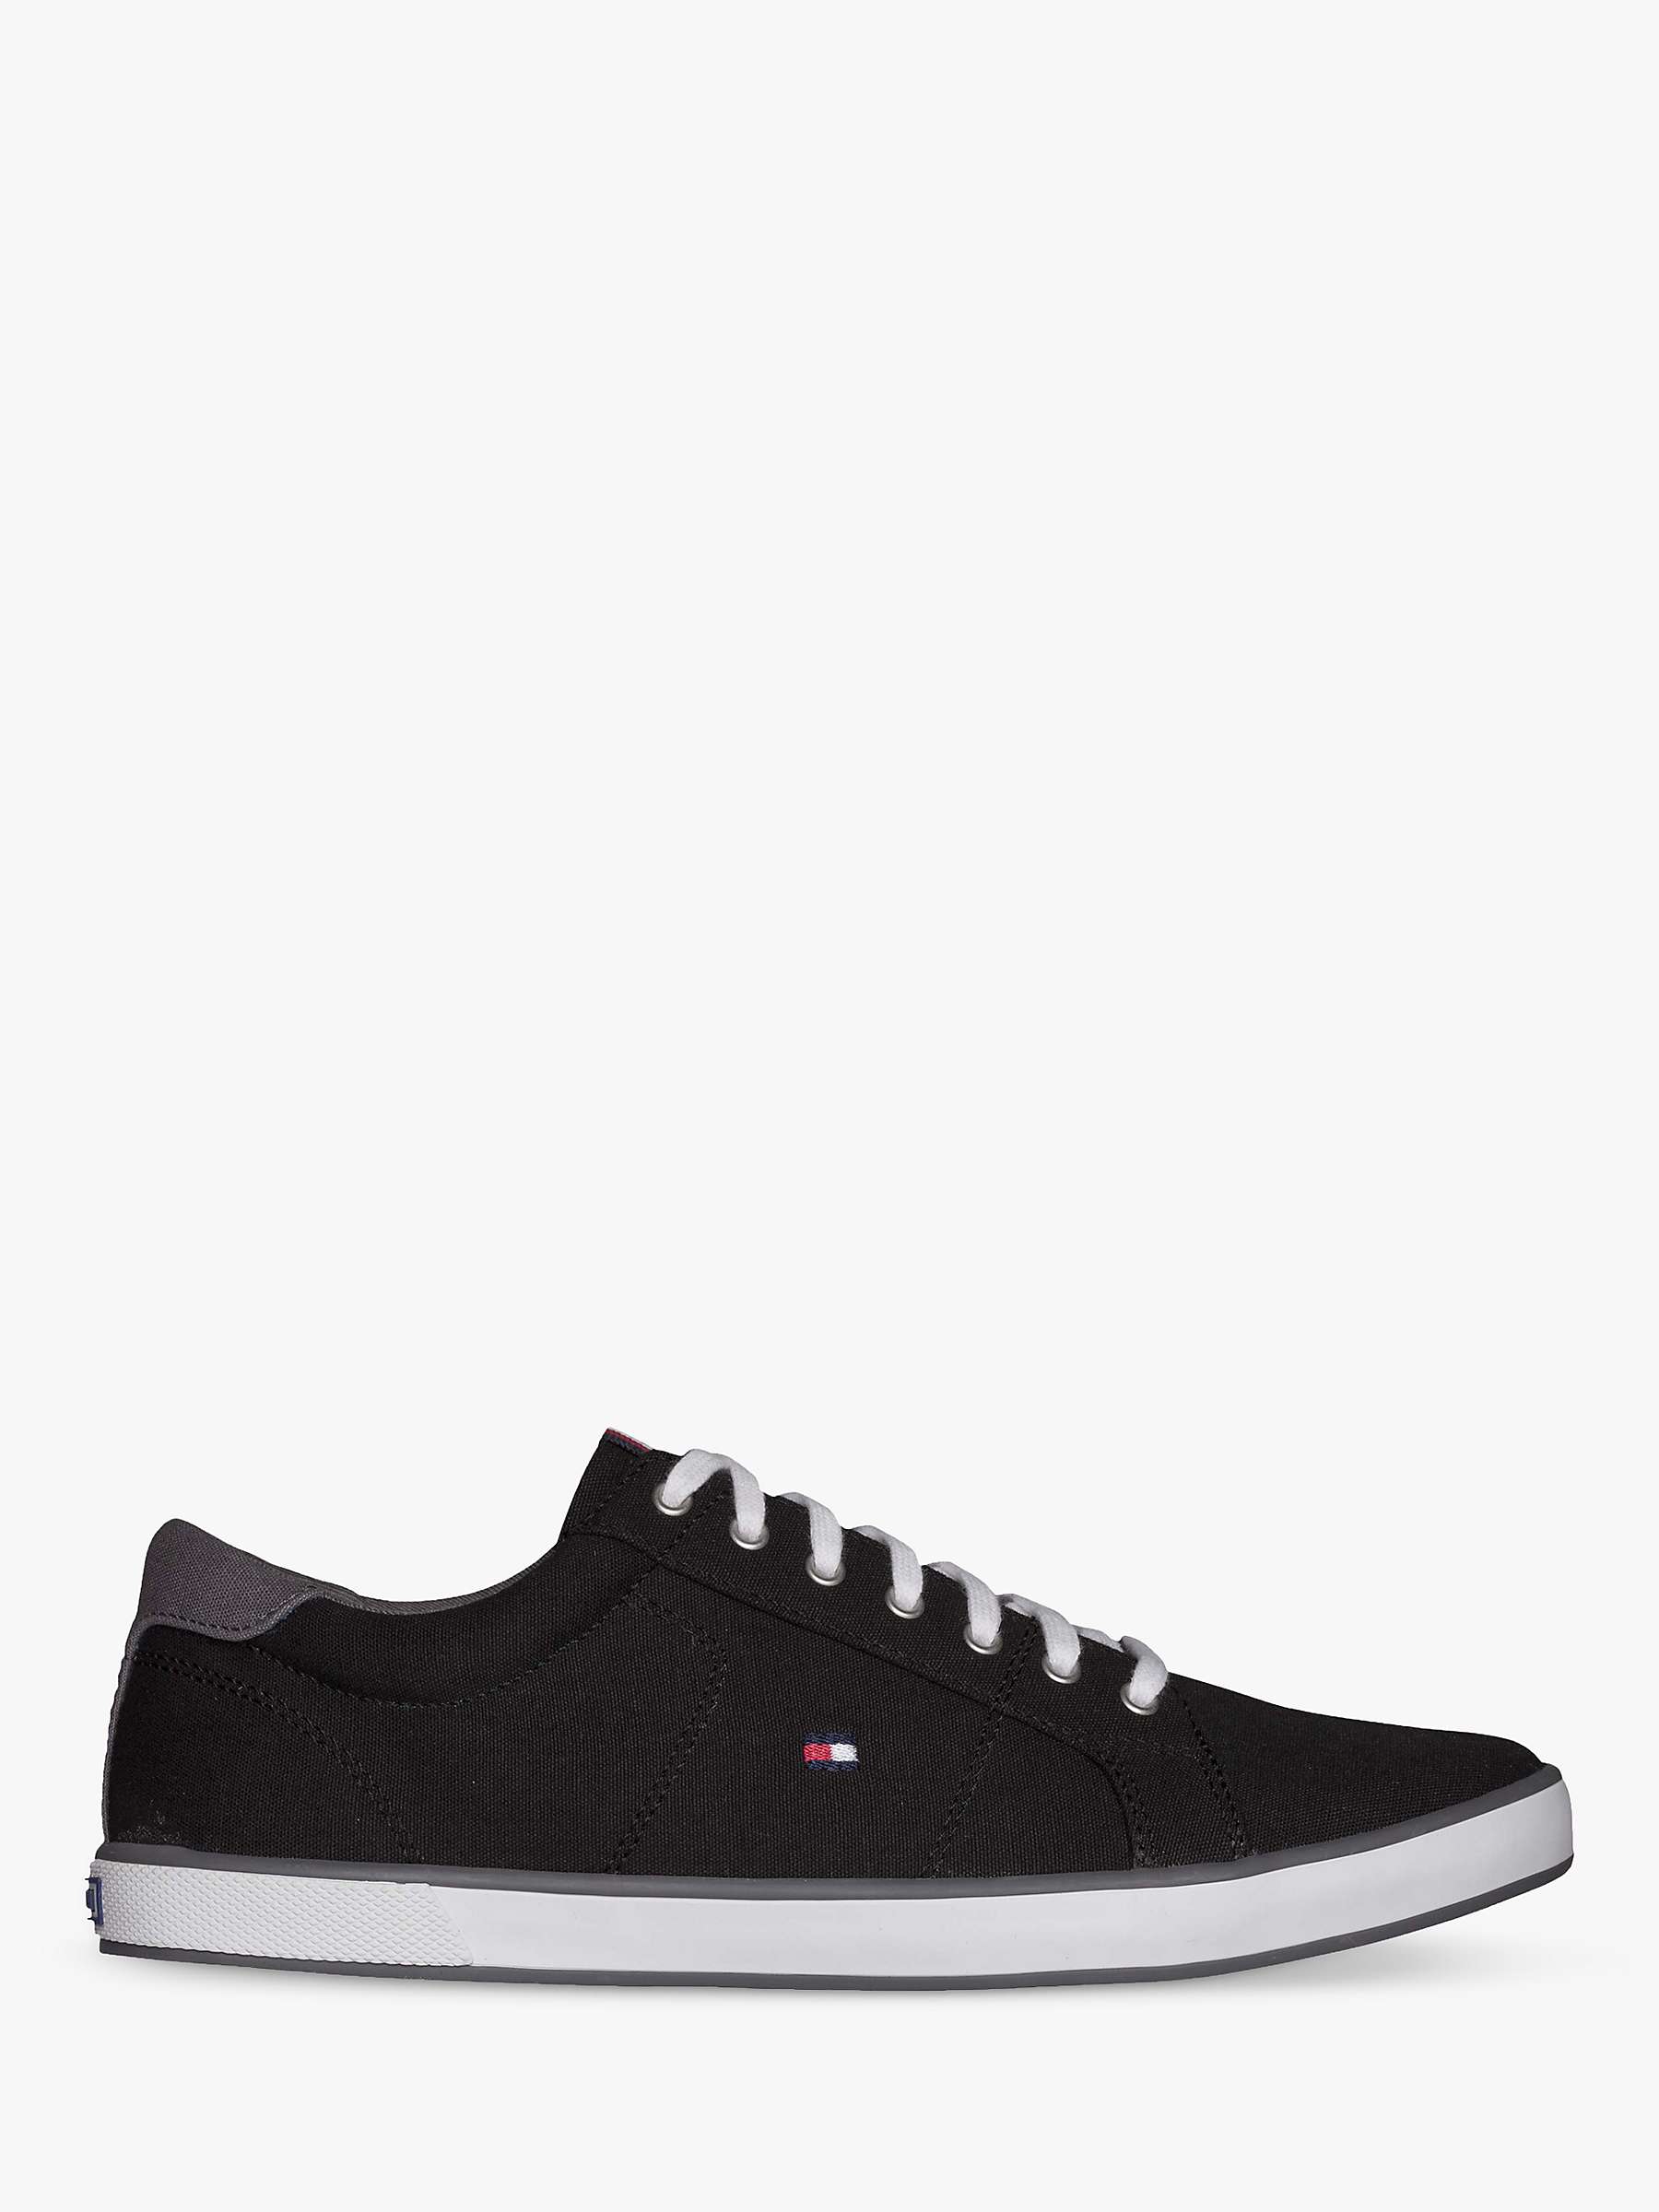 Buy Tommy Hilfiger Canvas Lace-Up Trainers Online at johnlewis.com